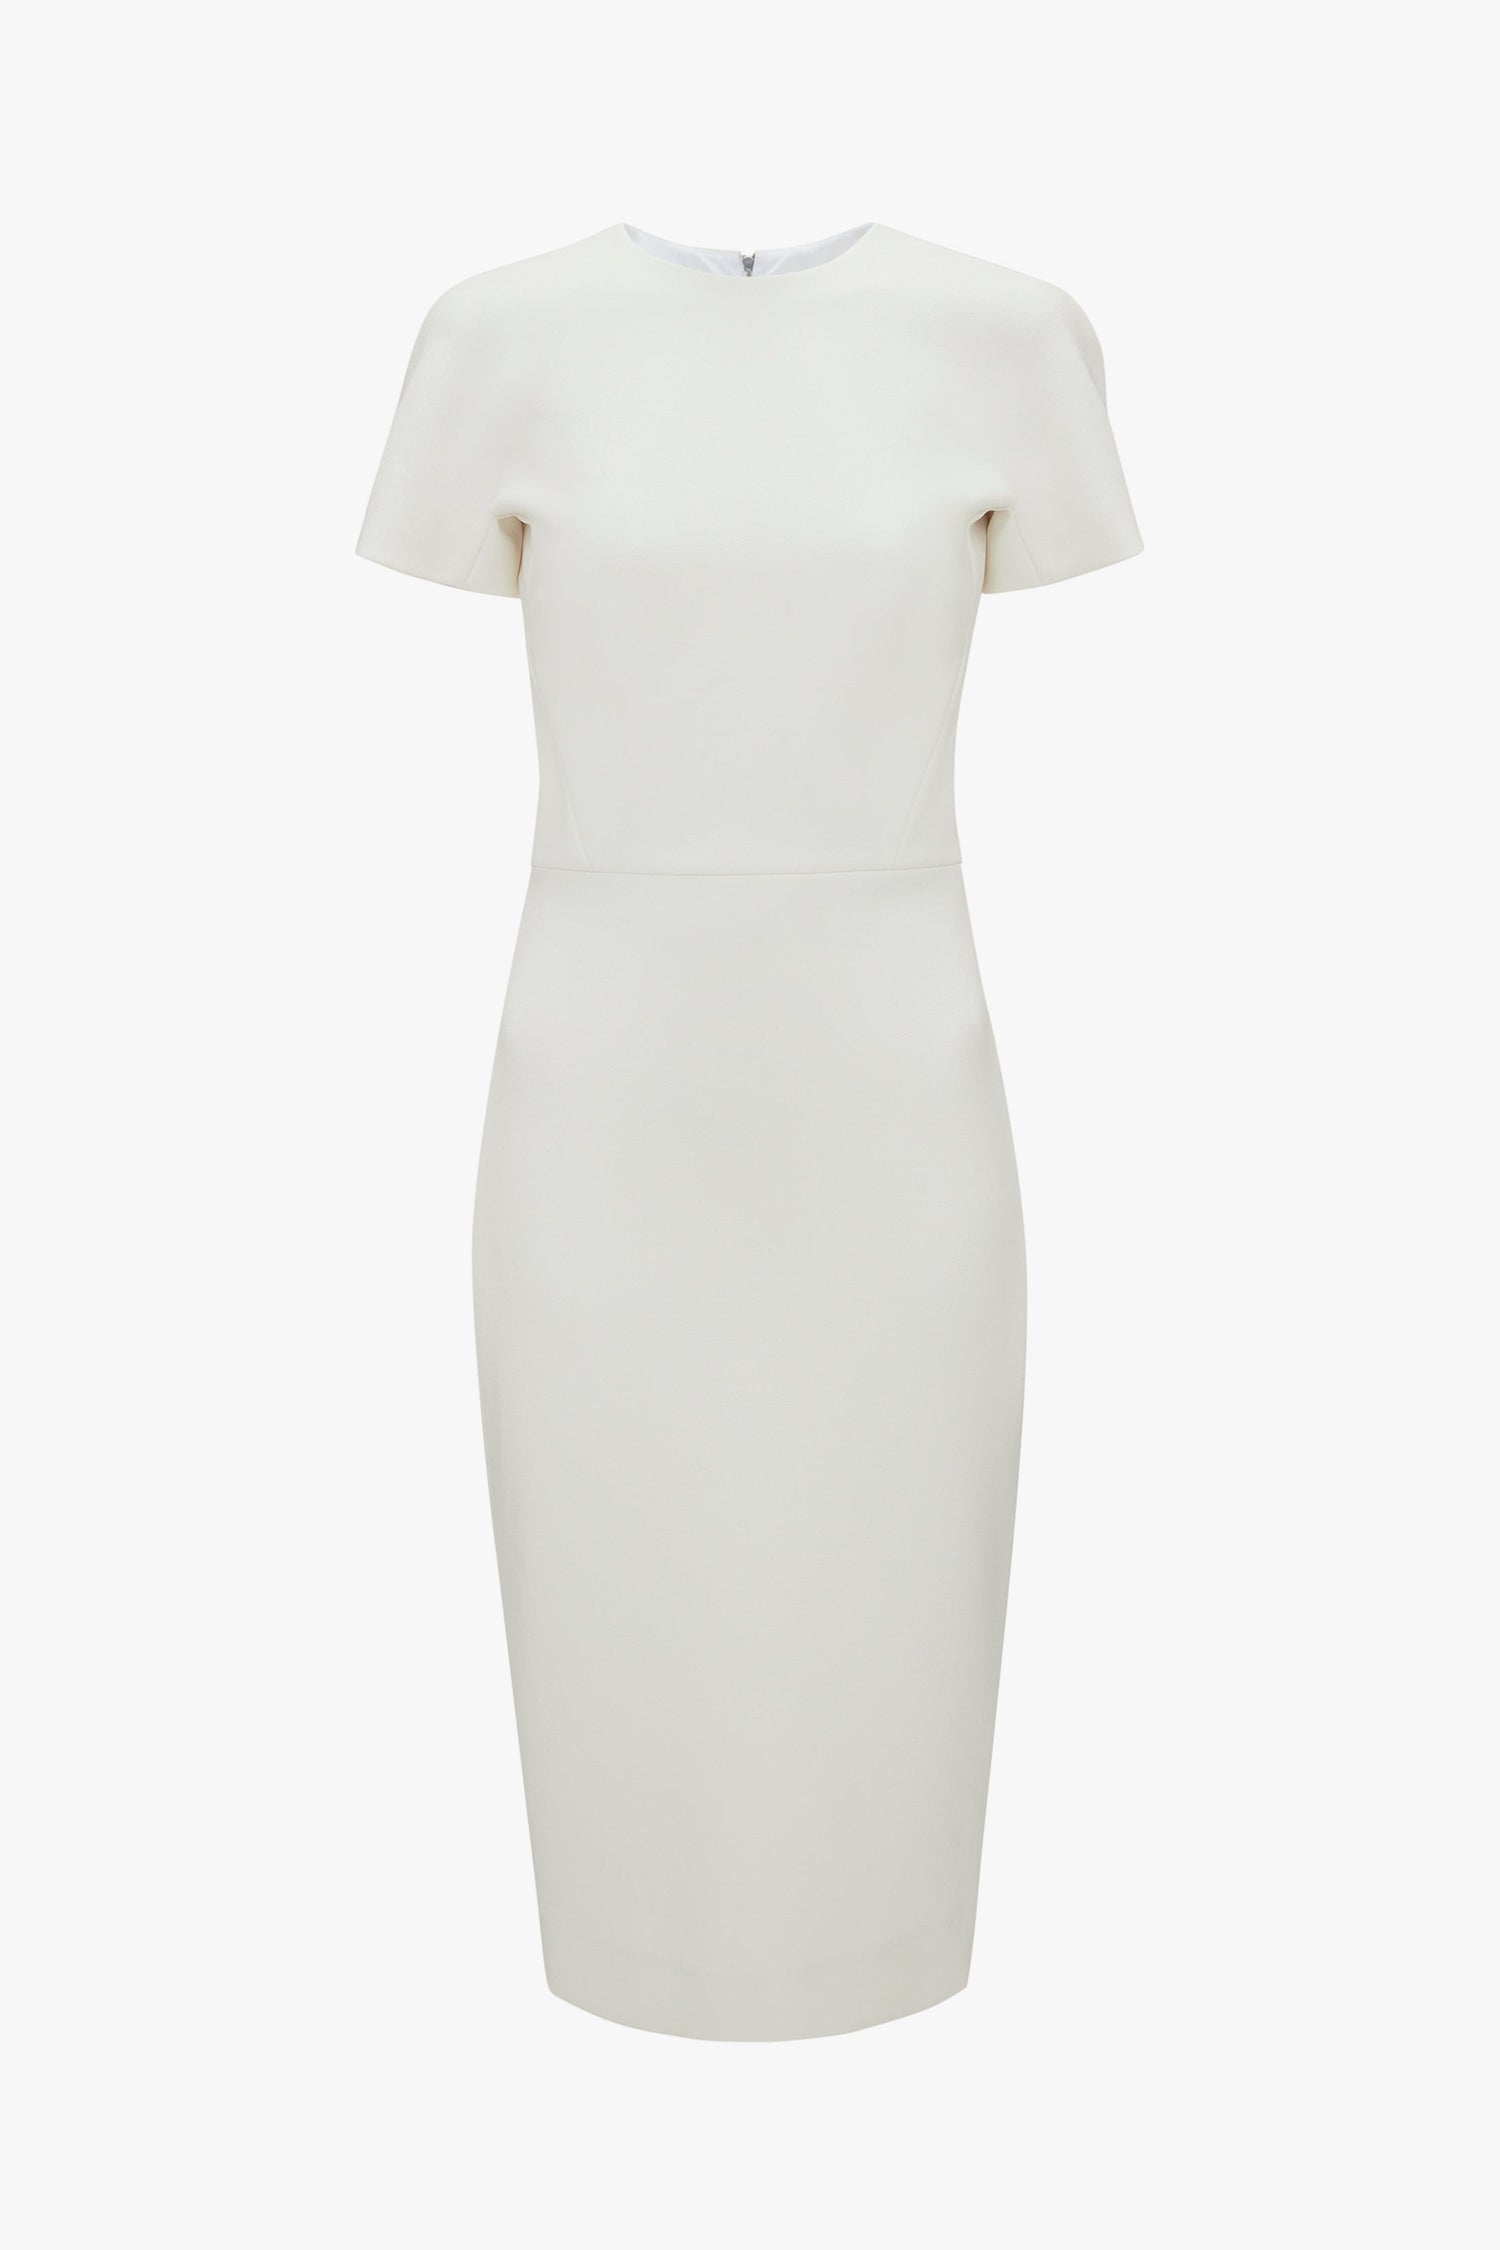 A plain, white, short-sleeved Victoria Beckham fitted T-shirt dress in ivory with a modest neckline, displayed against a white background.